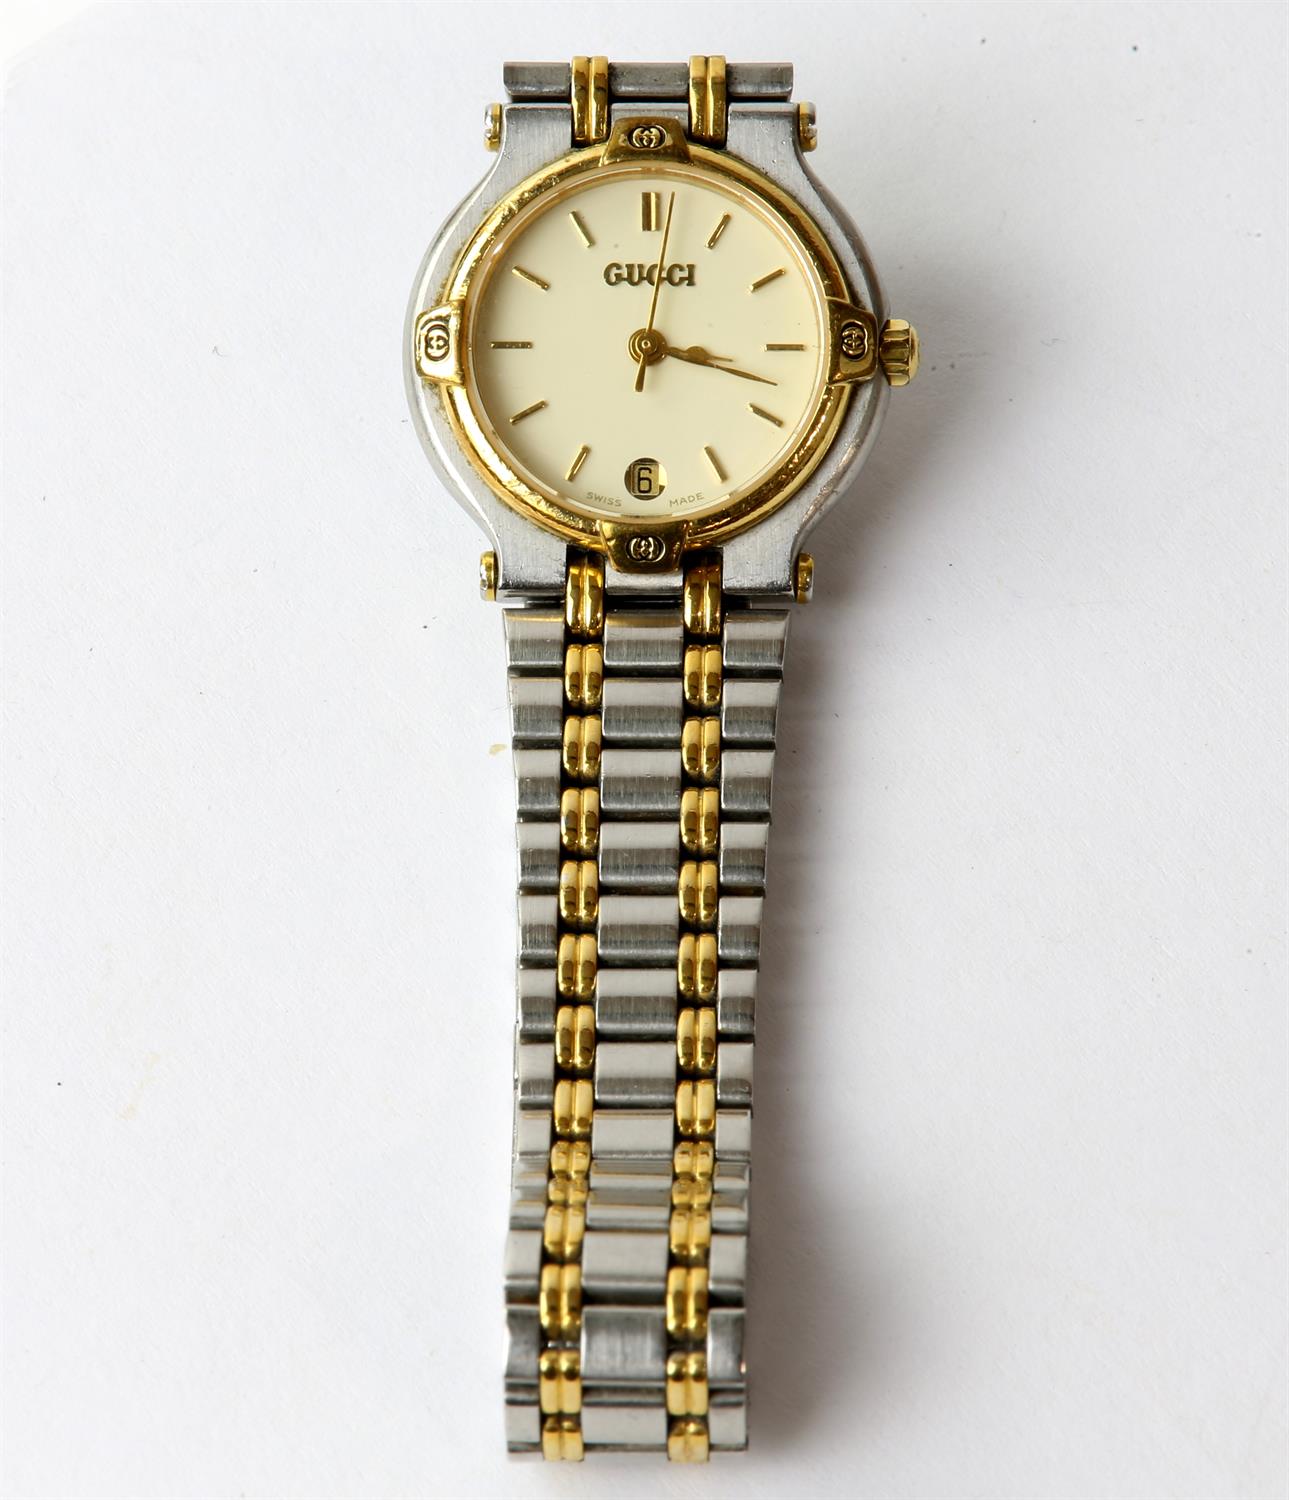 Ladies Gucci wristwatch, model 9000L, with circular cream dial, baton hour markers, - Image 3 of 6